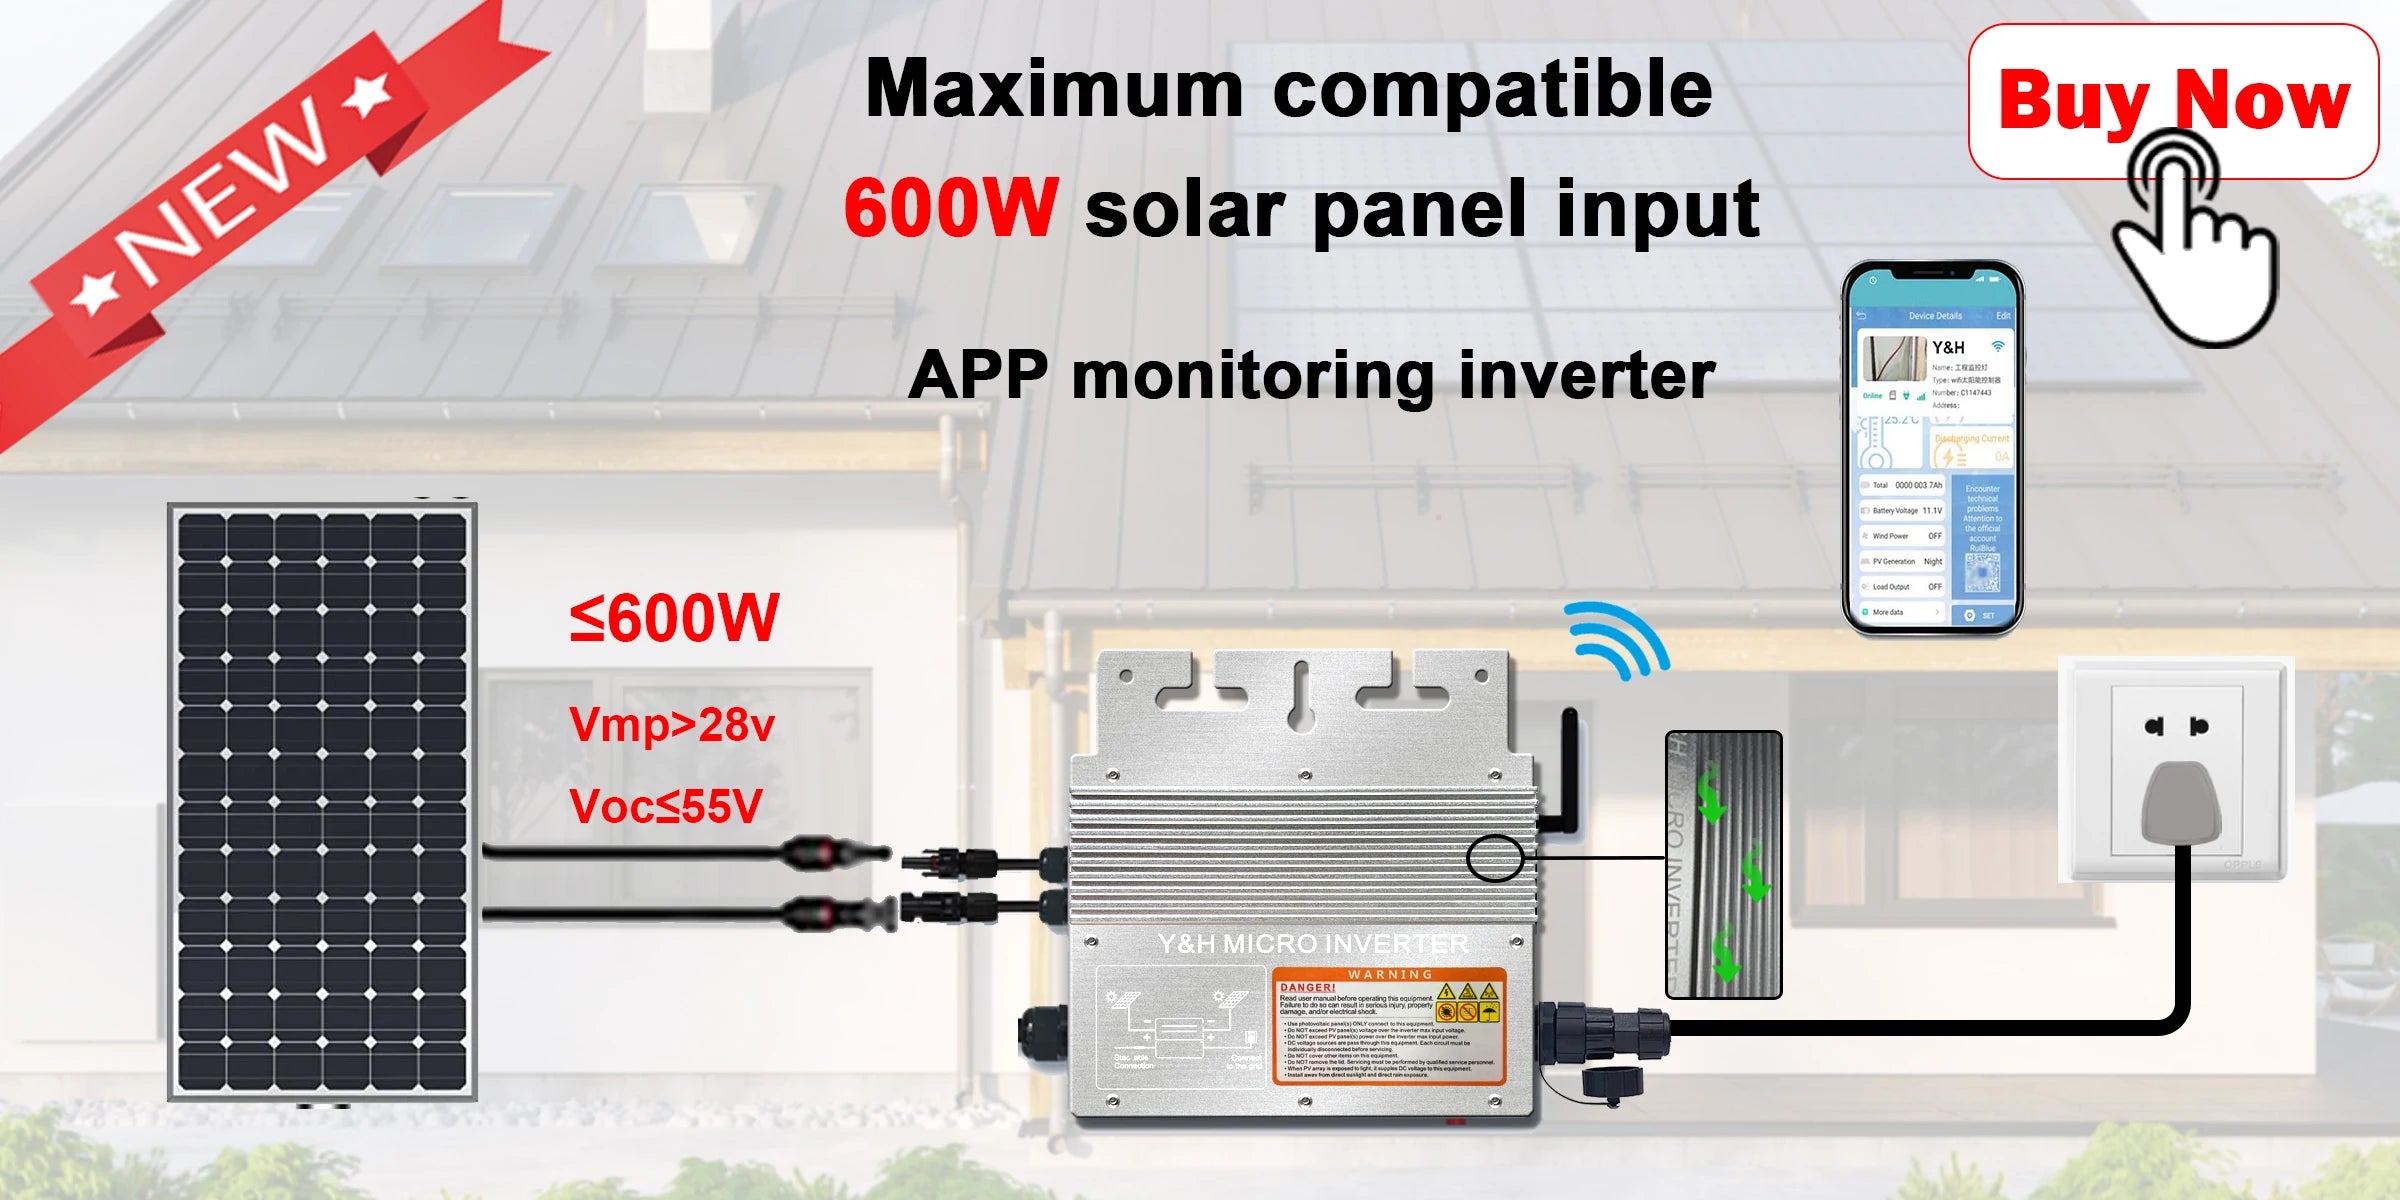 Grid-tie micro inverter with 600W input power, compatible with solar panels and featuring monitoring and alert features.